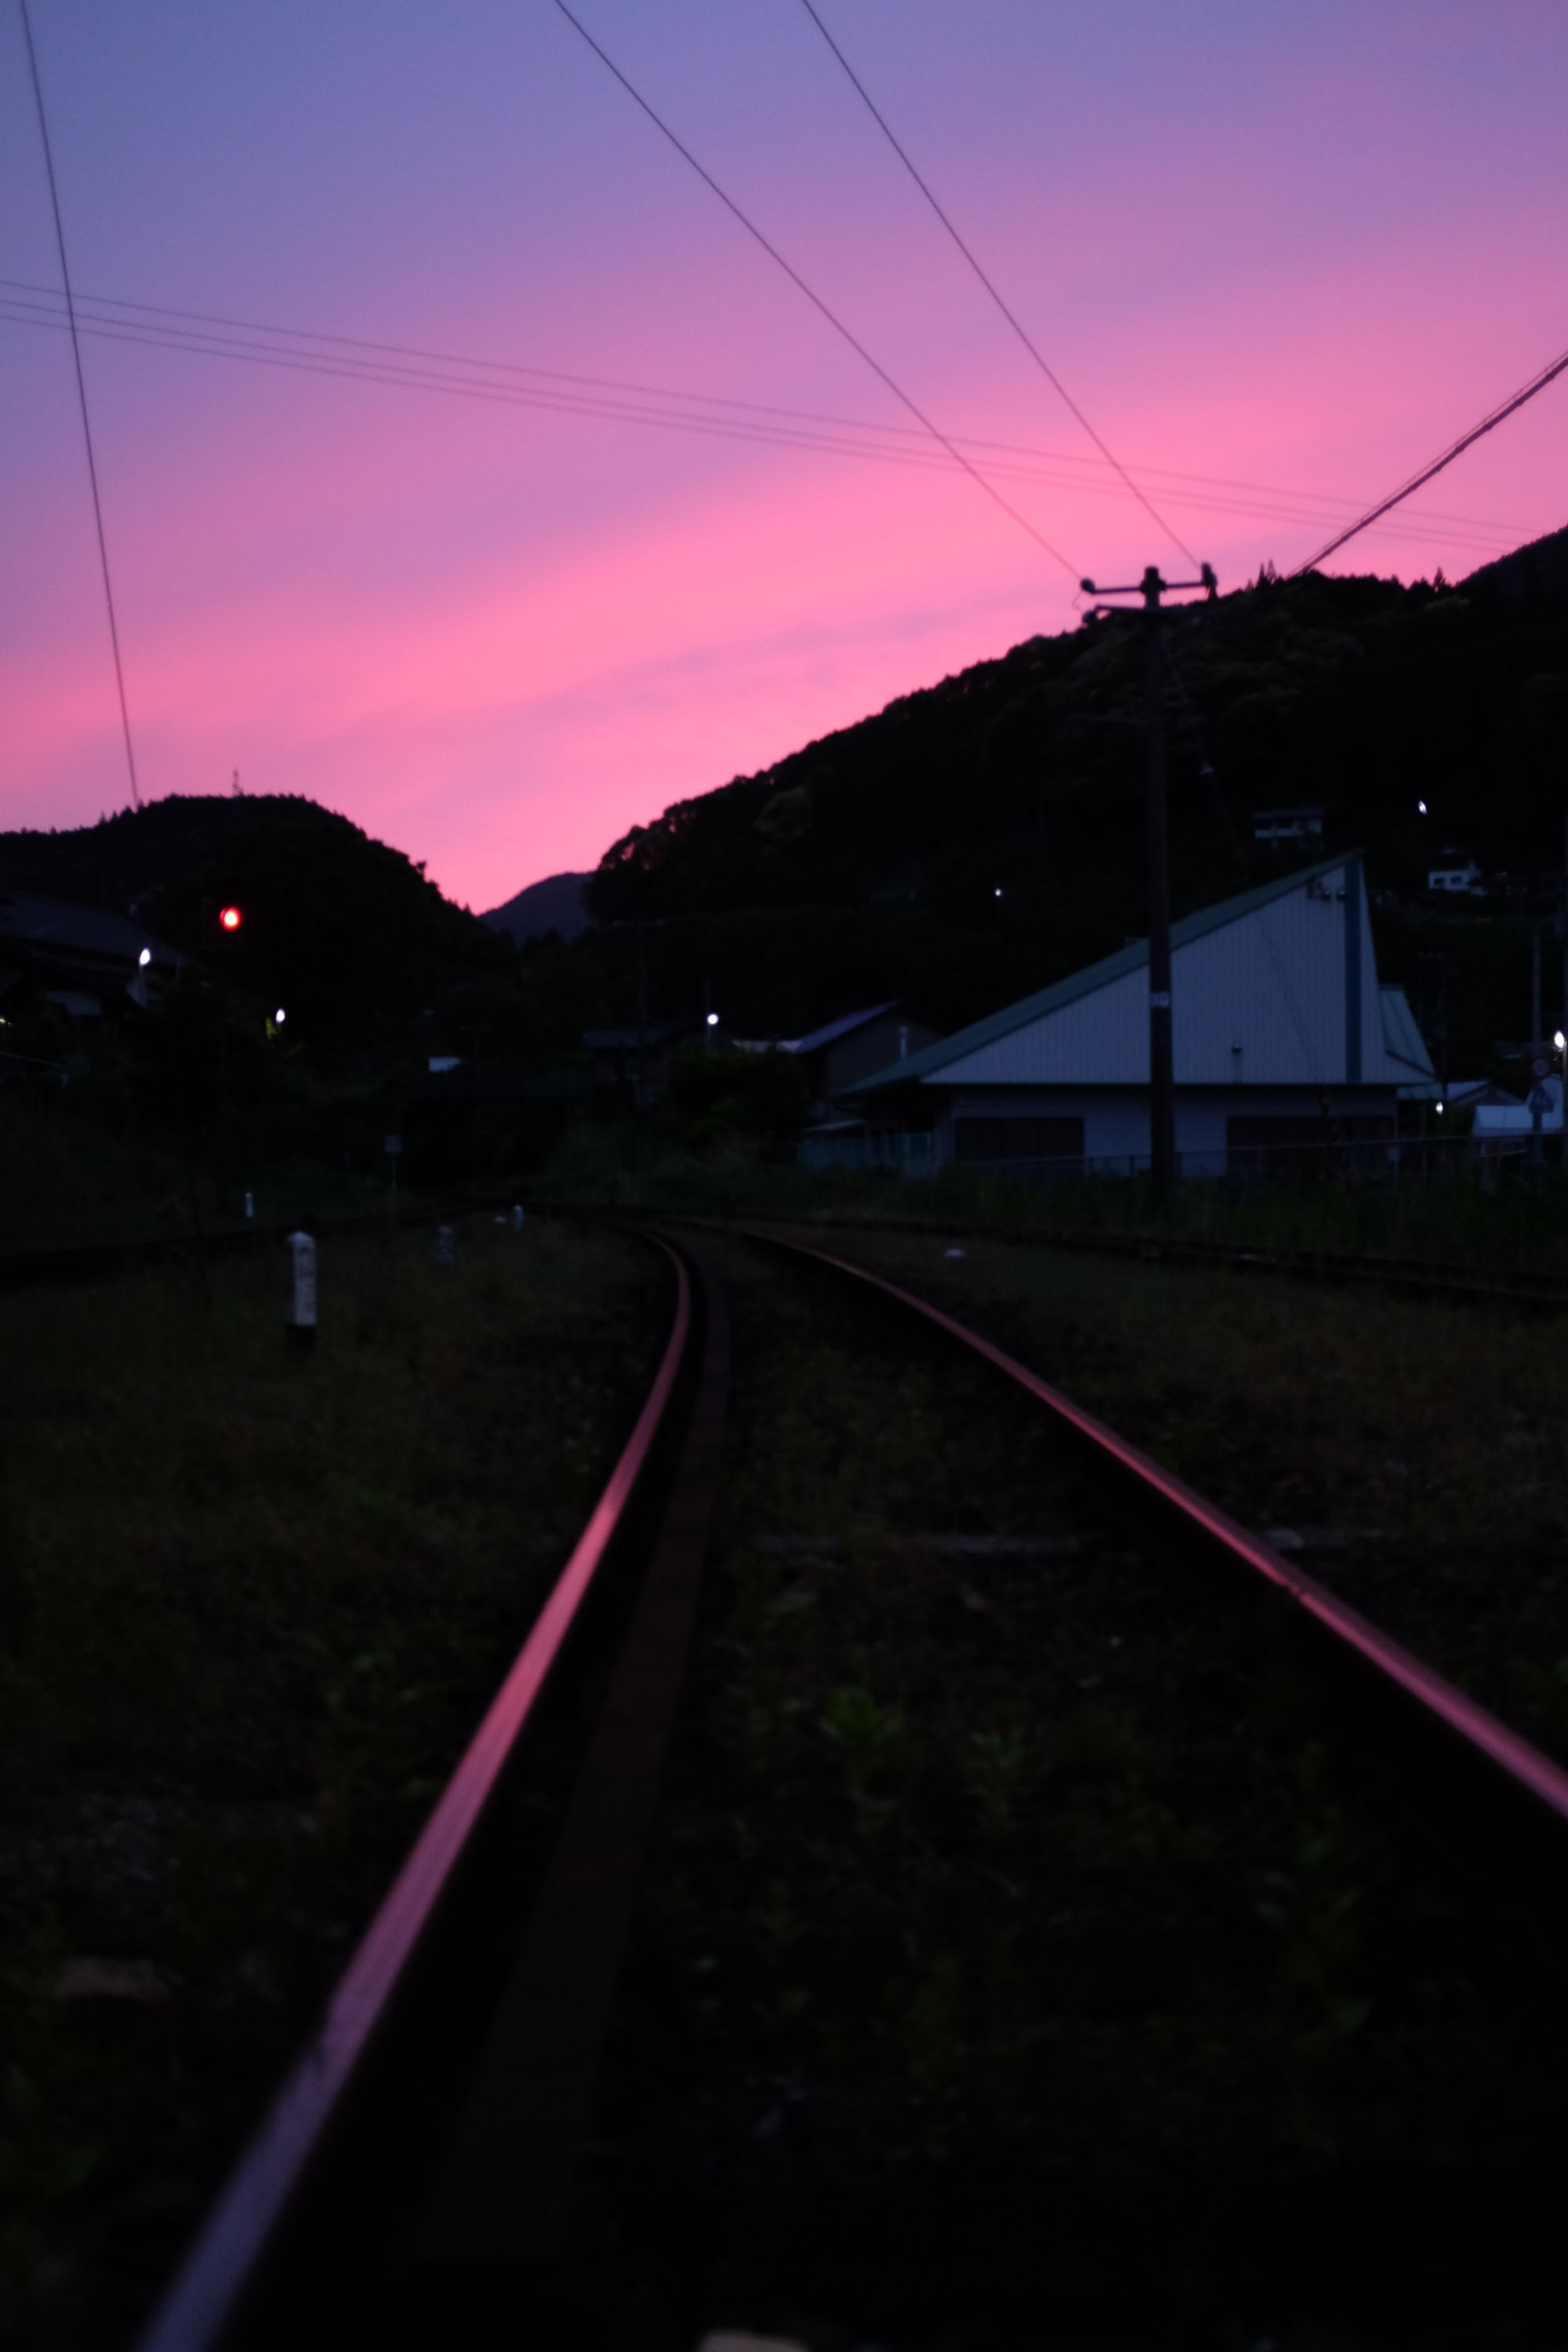 Looking at a blue-pink-purple sunset from the middle of a pair of railway tracks.